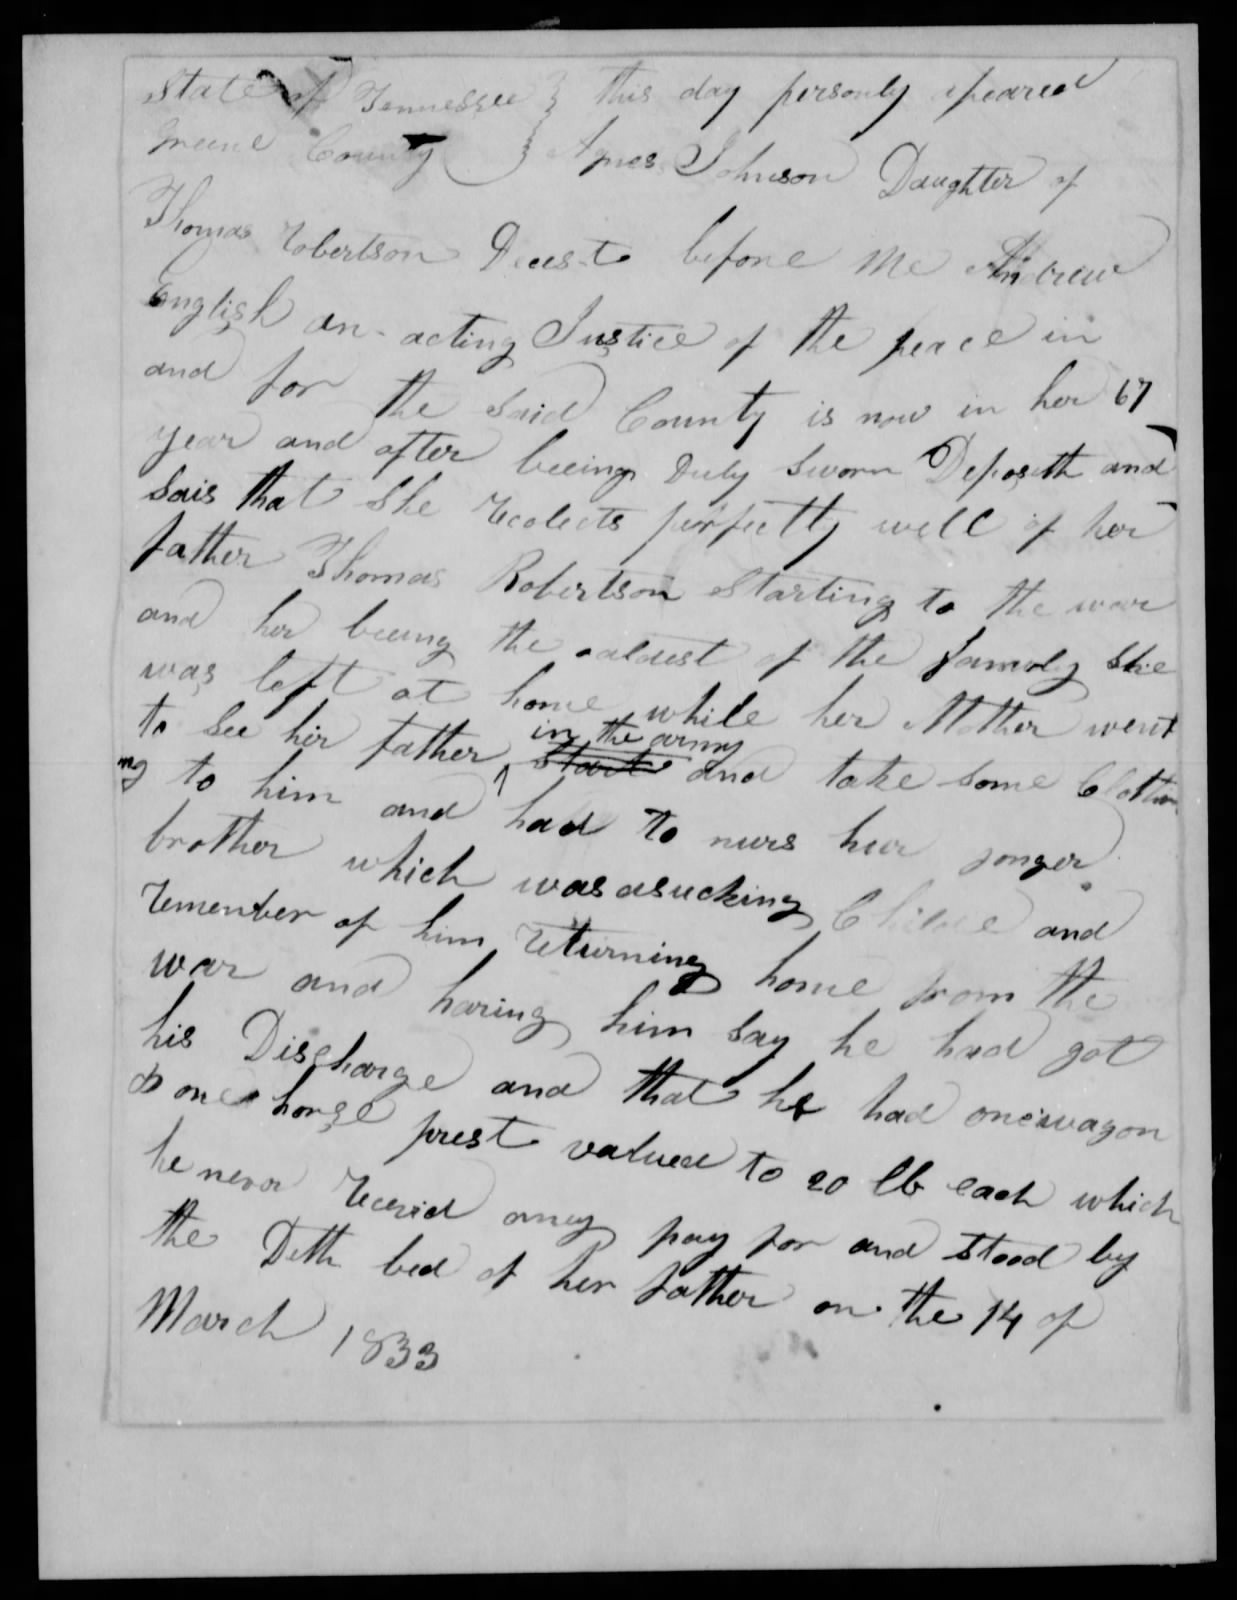 Affidavit of Agnes Johnson in support of a Pension Claim for Mary Robison, 17 February 1835, page 1